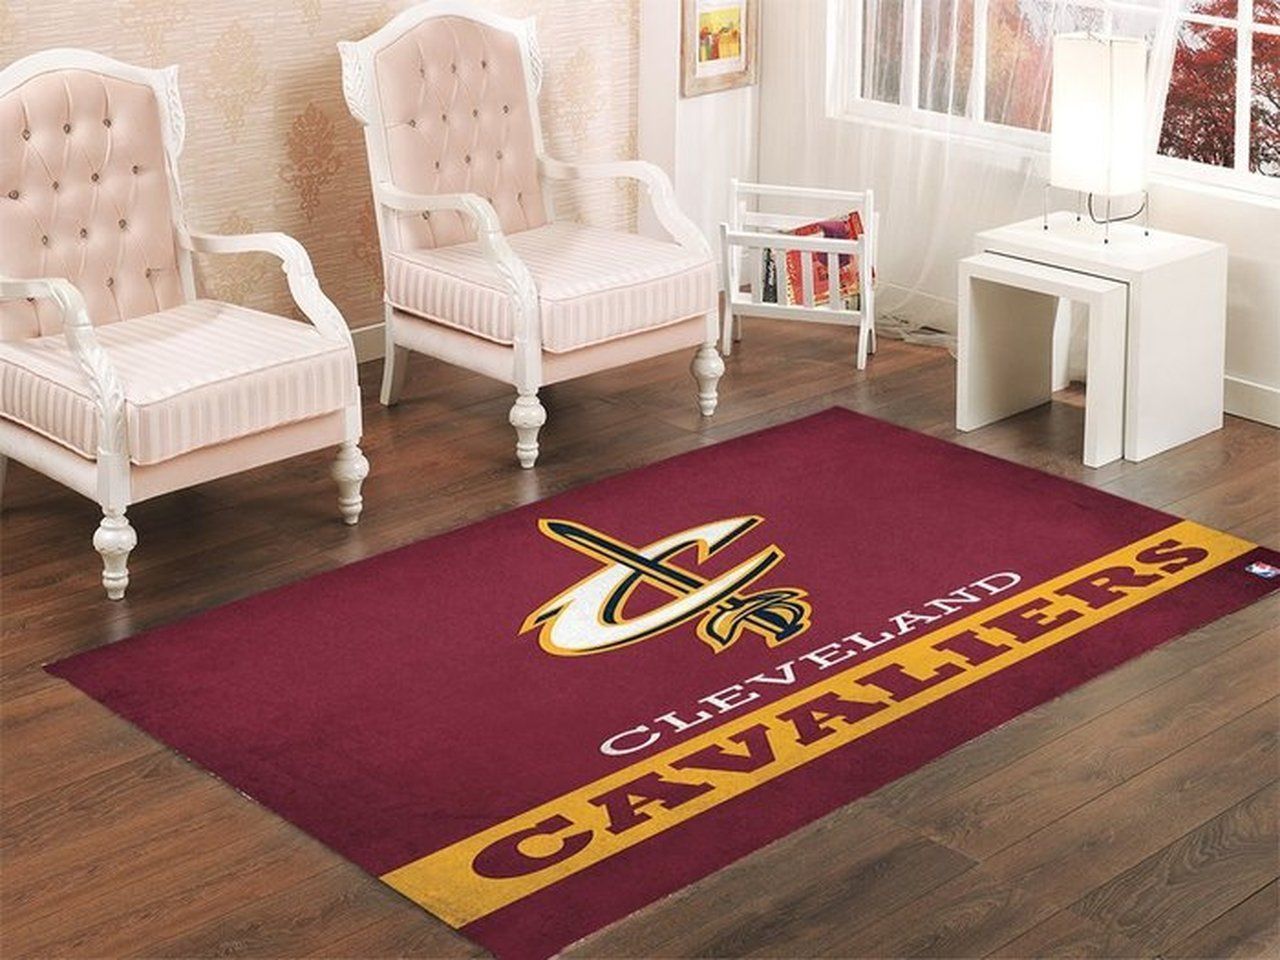 Cleveland Cavaliers Living Room Area Rug